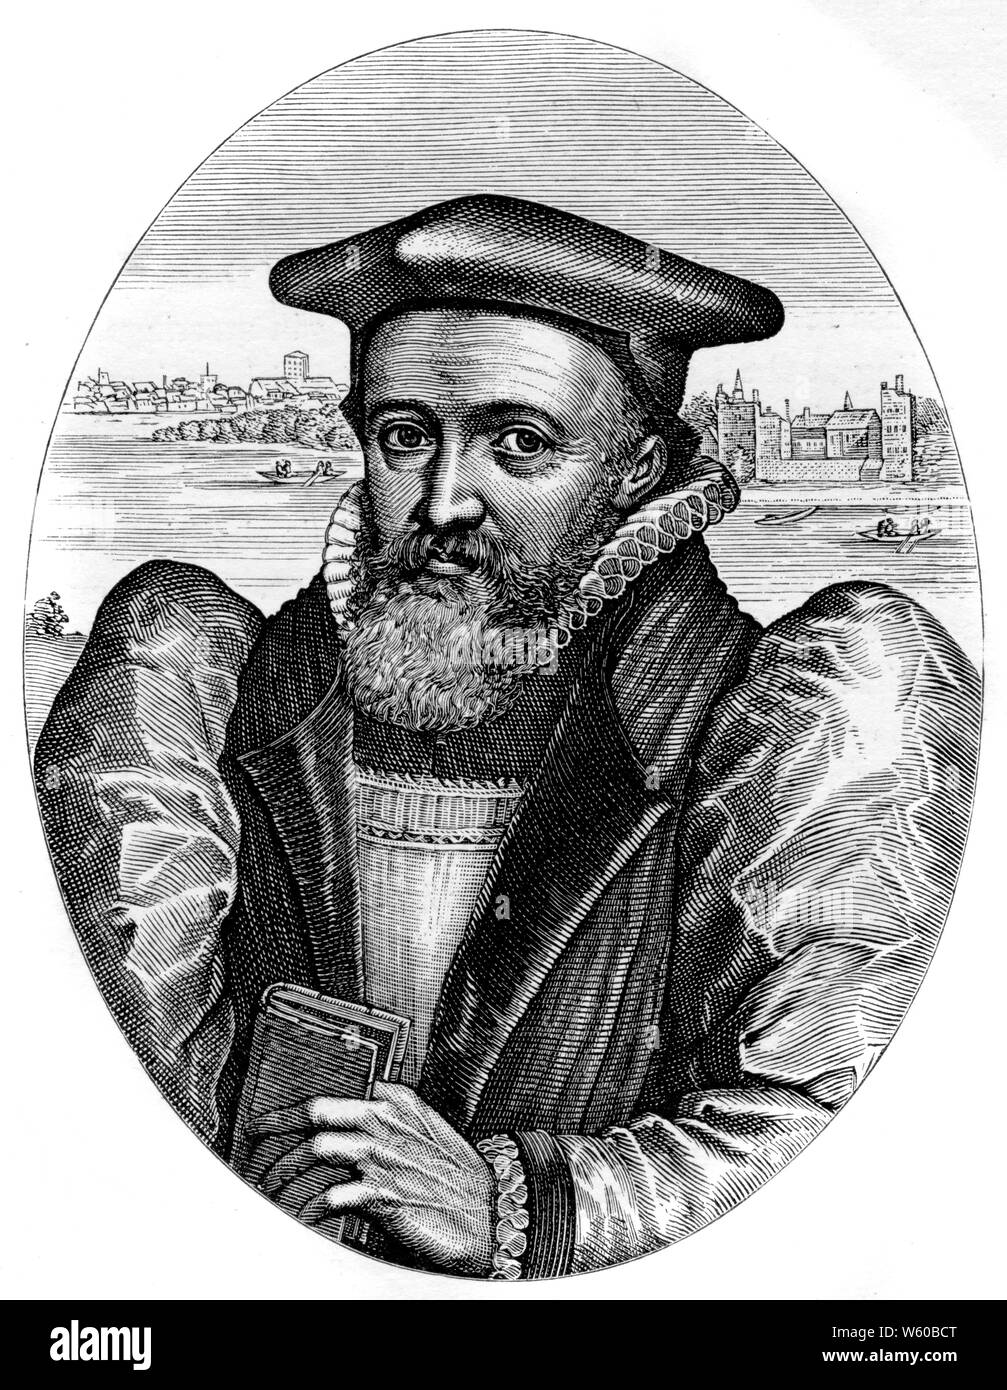 George Abbot, Archbishop of Canterbury, 1616. After Simon va de Passe (1595-1647). George Abbot (1562-1633), Archbishop of Canterbury from 1611 to 1633. Abbot also served as the fourth Chancellor of Trinity College, Dublin, from 1612 to 1633. Abbot is seen here with the River Thames and Lambeth Palace behind him. Stock Photo